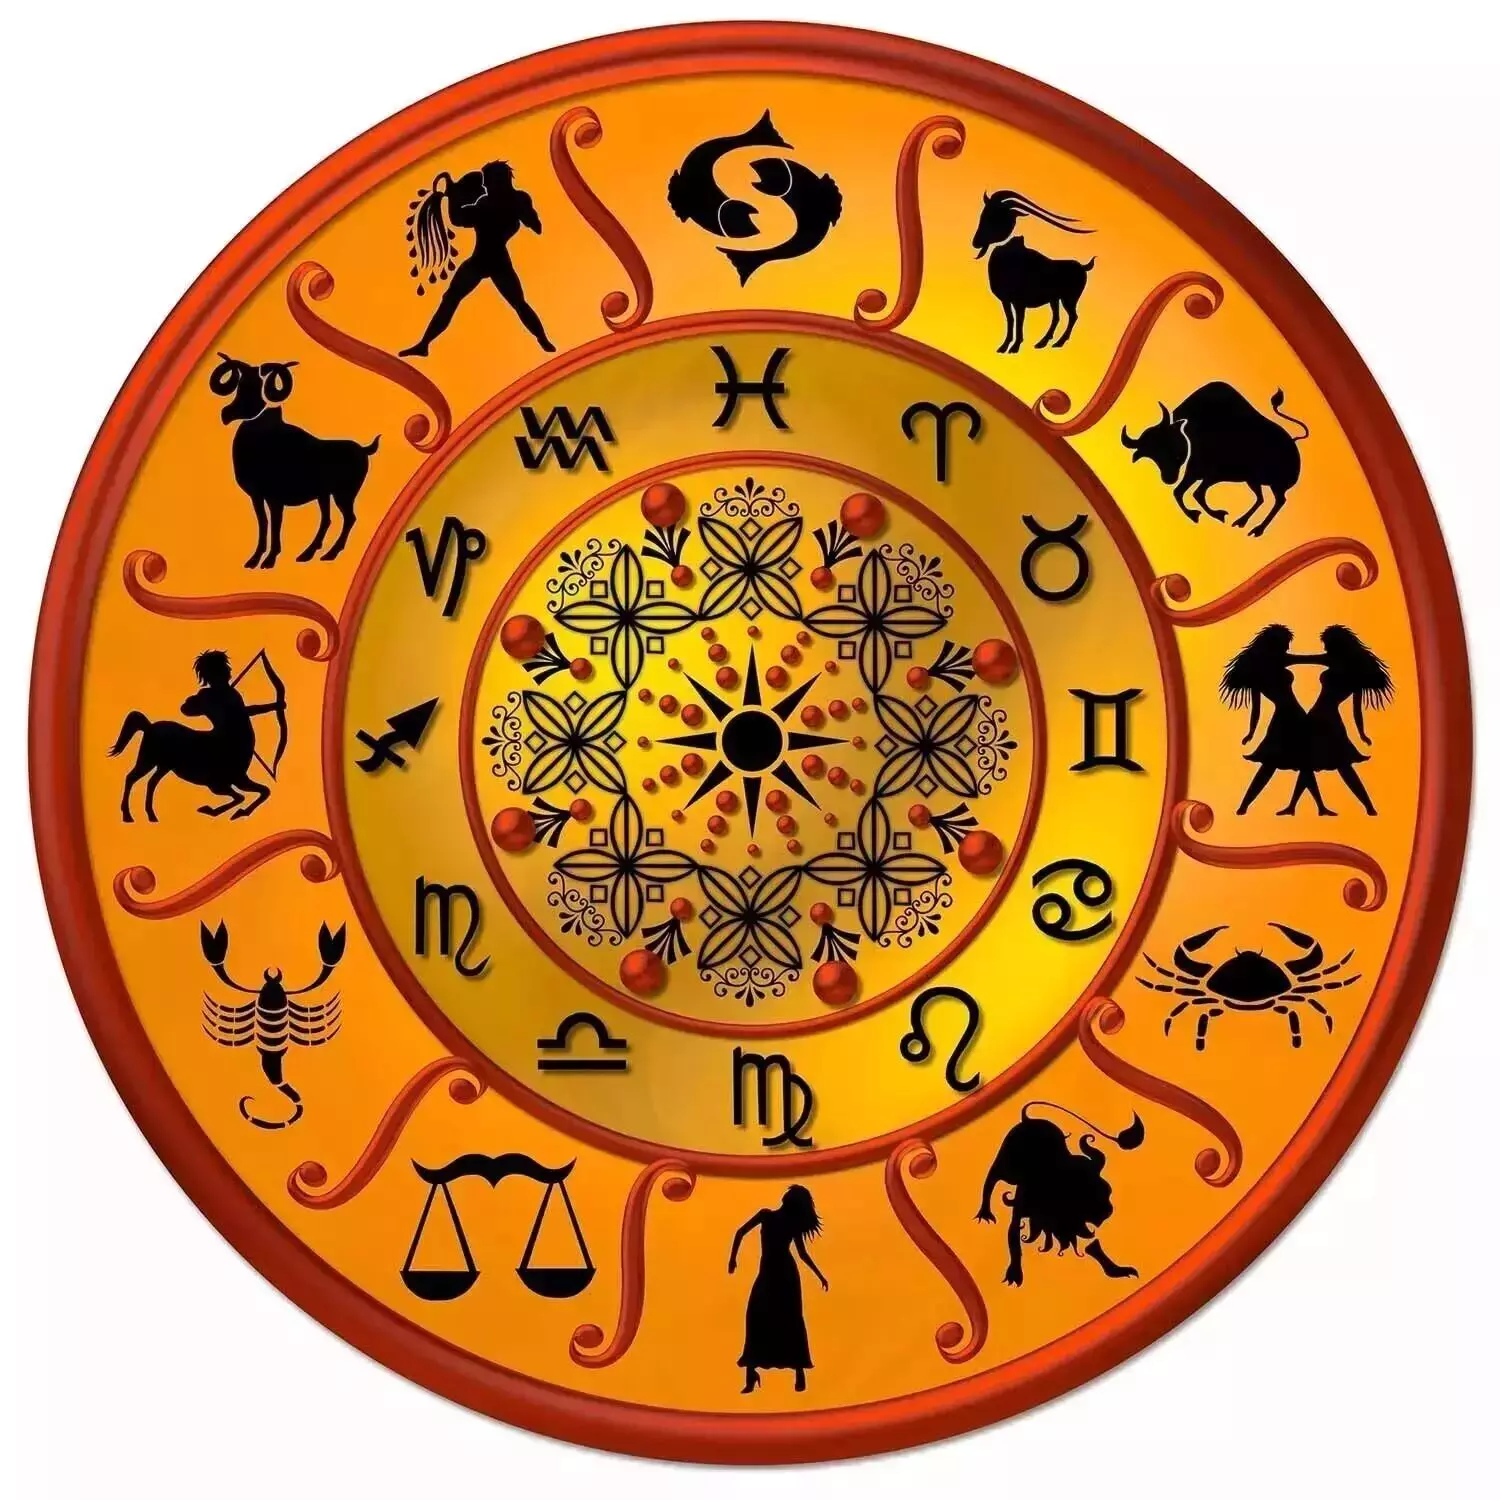 26 February  – Know your todays horoscope